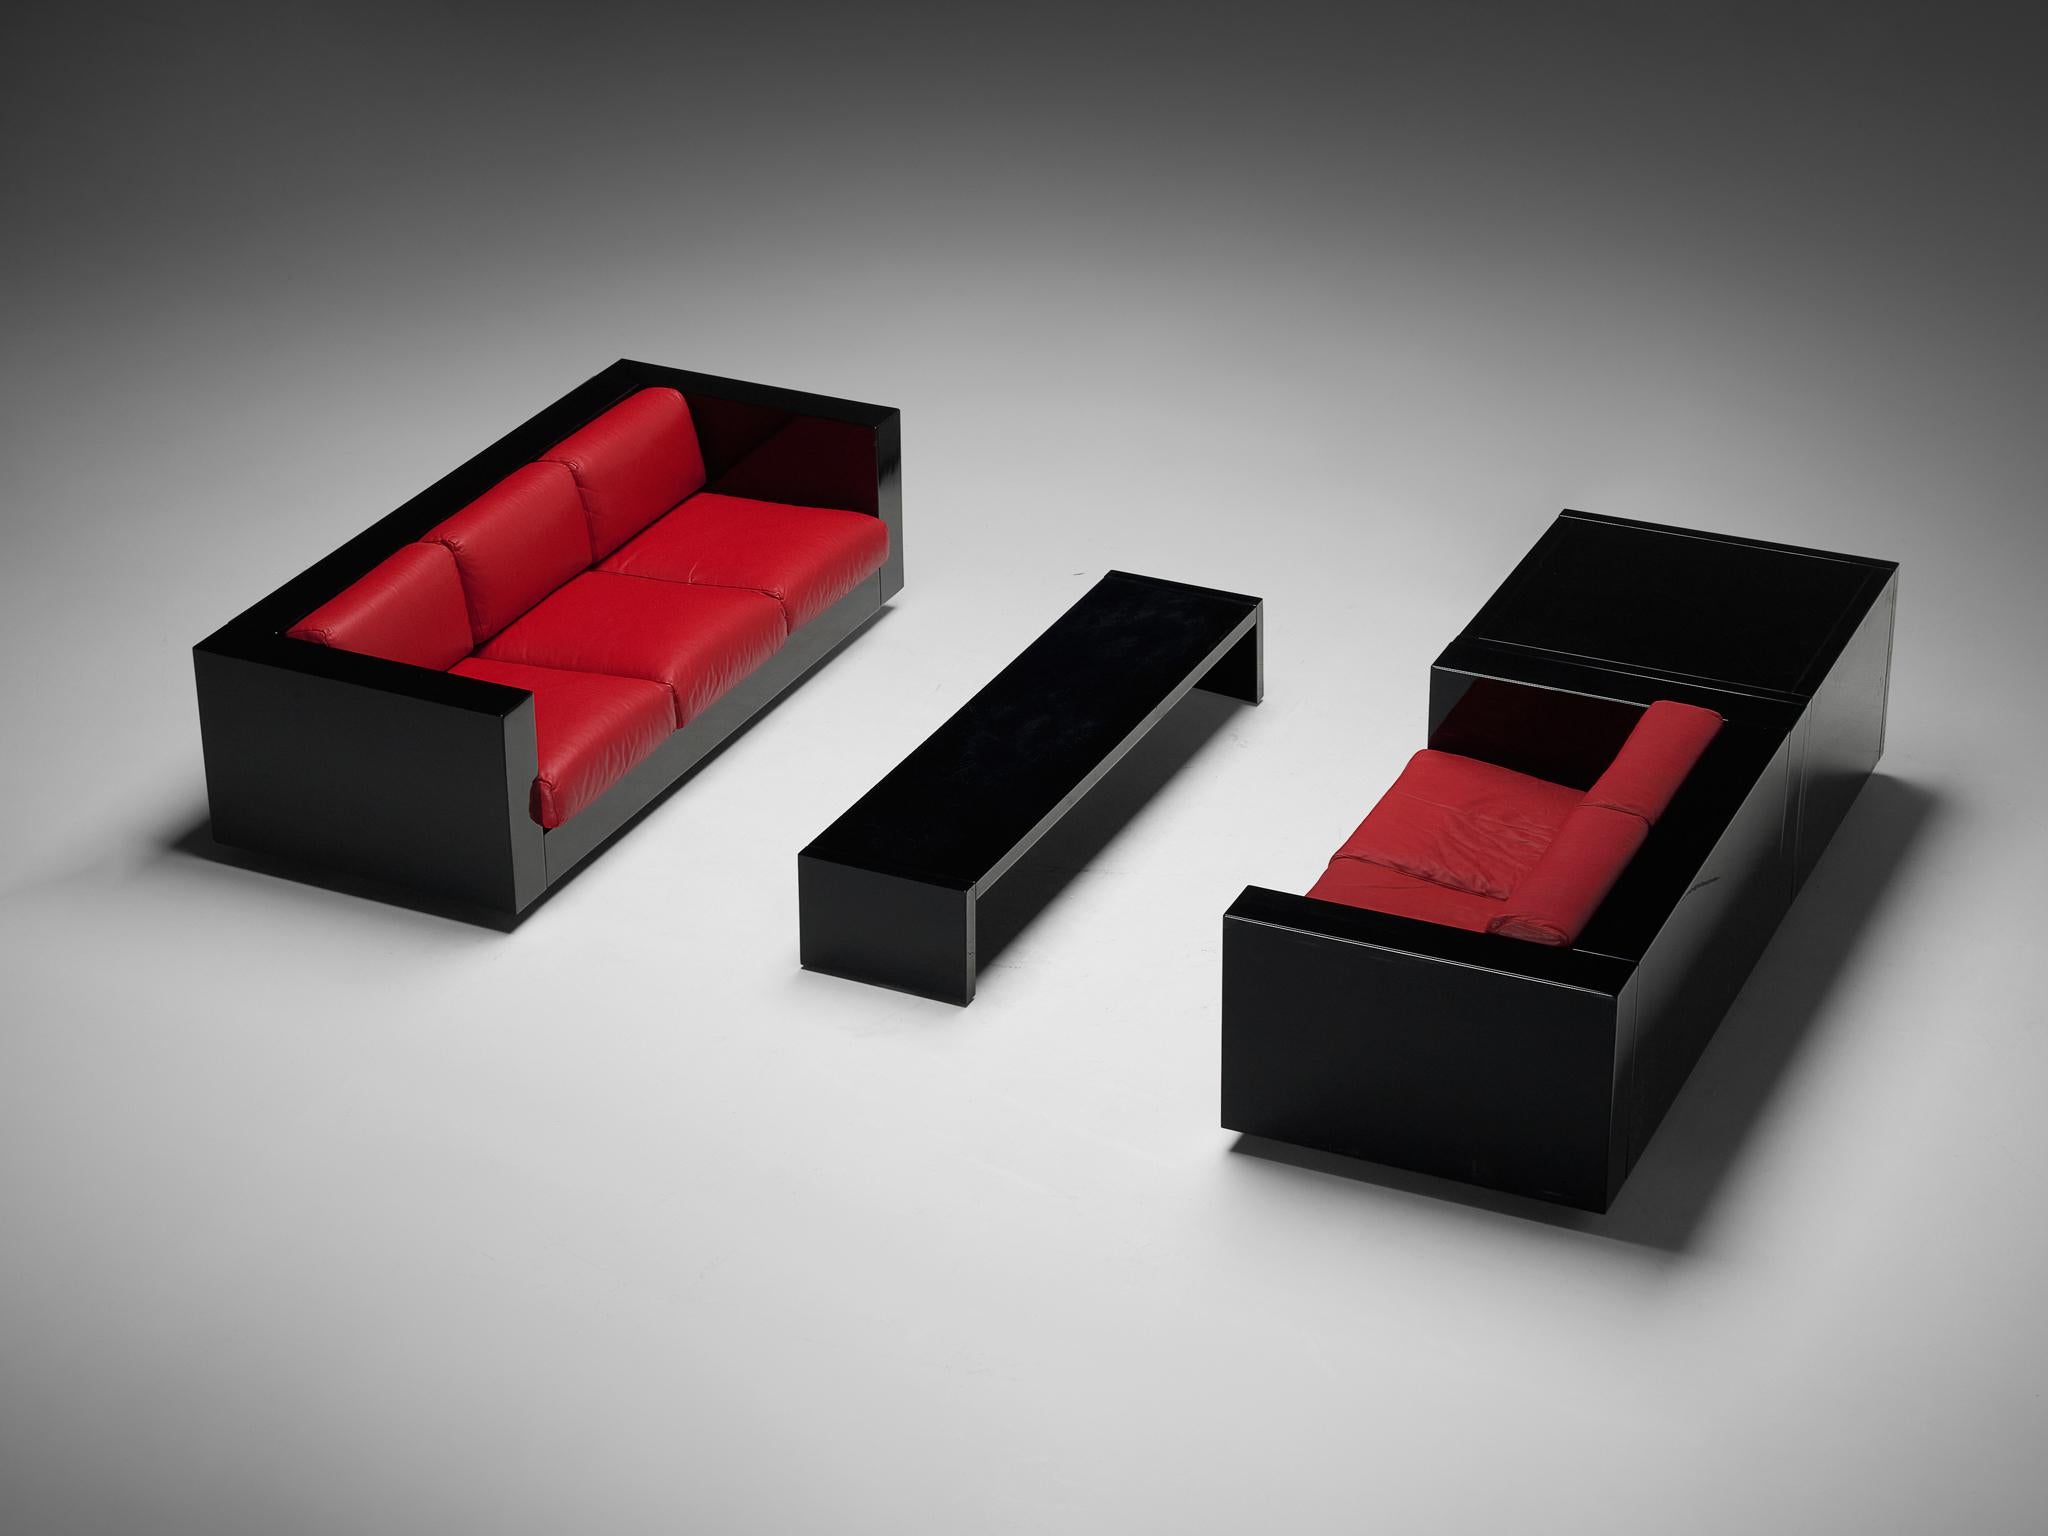 Massimo and Lella Vignelli for Poltronova 'Saratoga' living room set three-seat sofa, two-seat sofa, coffee table, and cabinet, polyester lacquer and red leather, Italy, 1964.

Captivating large lounge set or living room interior by Italian designer